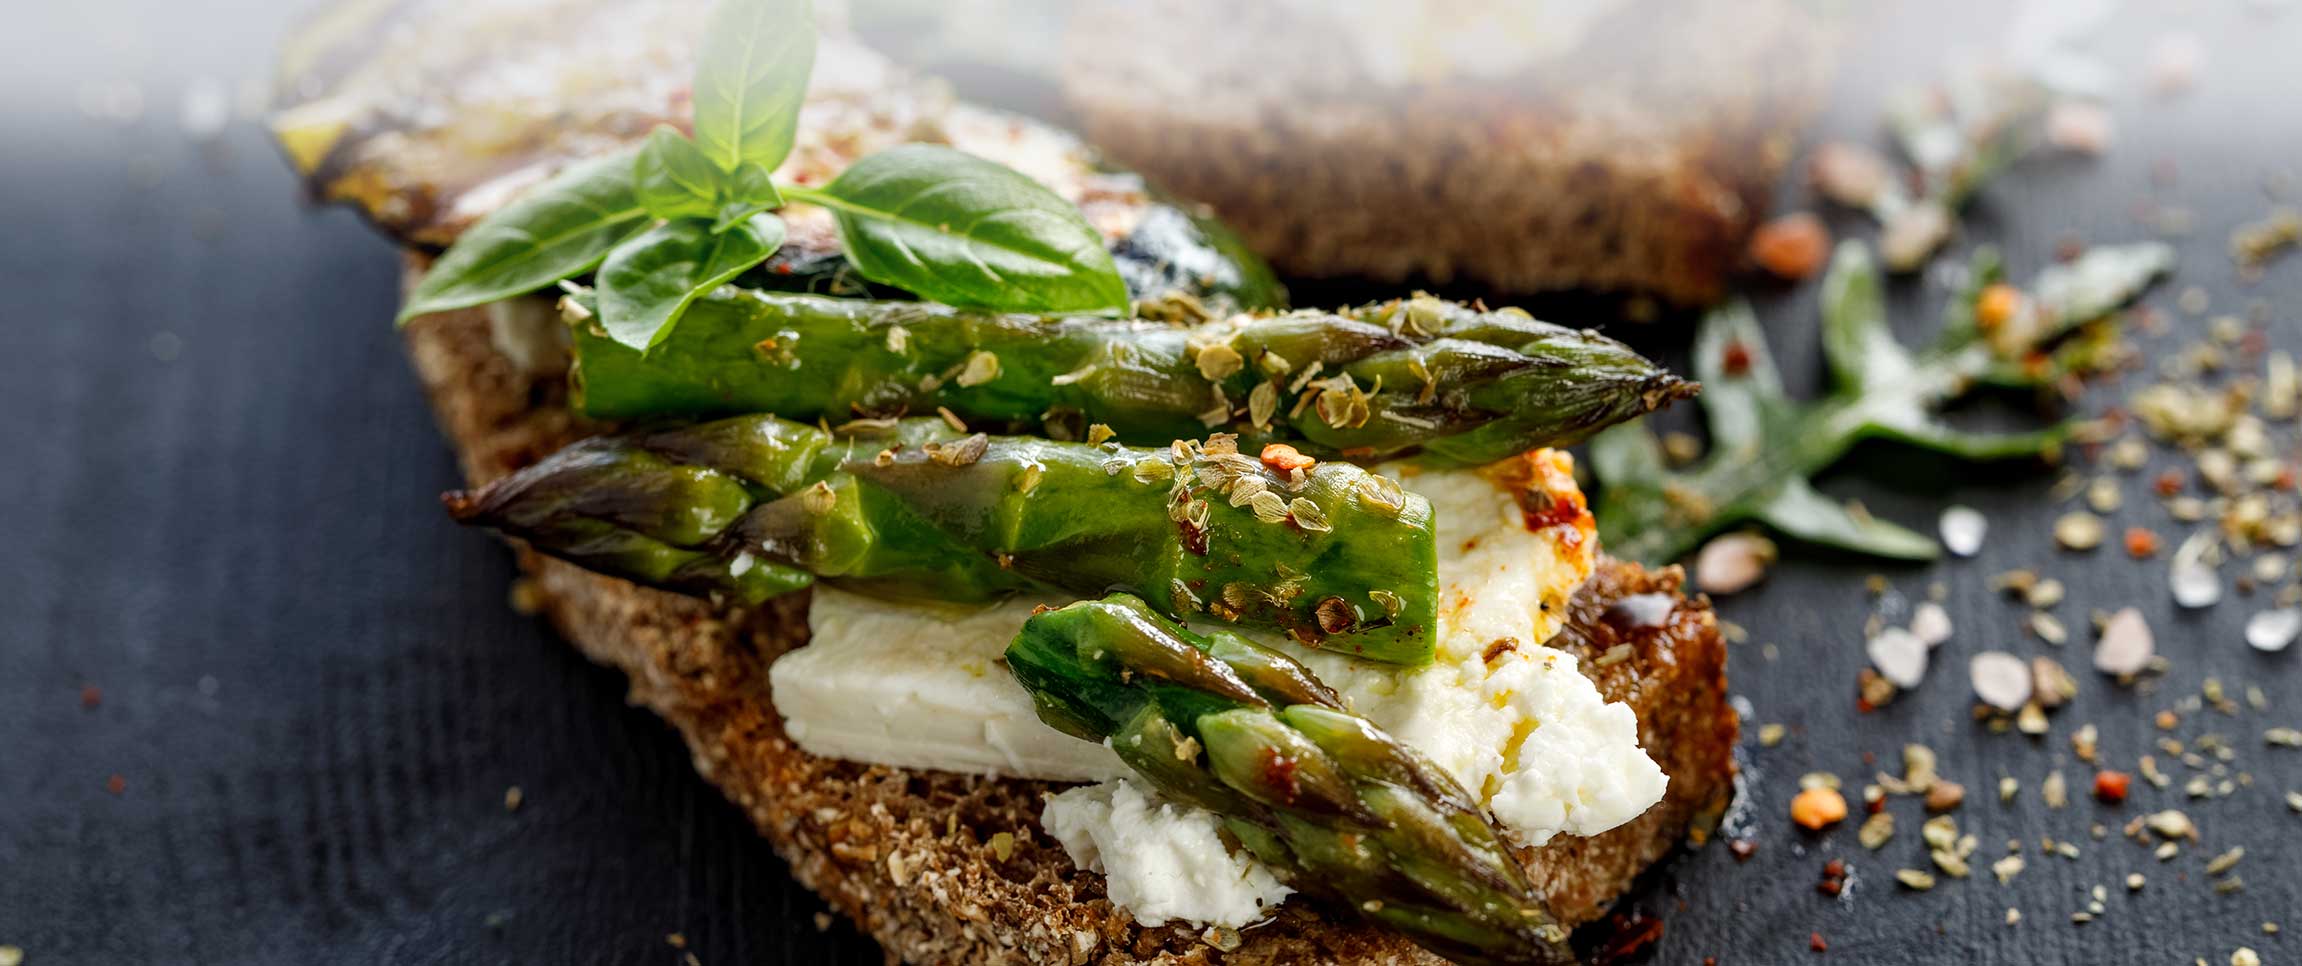 Ricotta Bruschetta Topped with Asparagus and Fig Compote